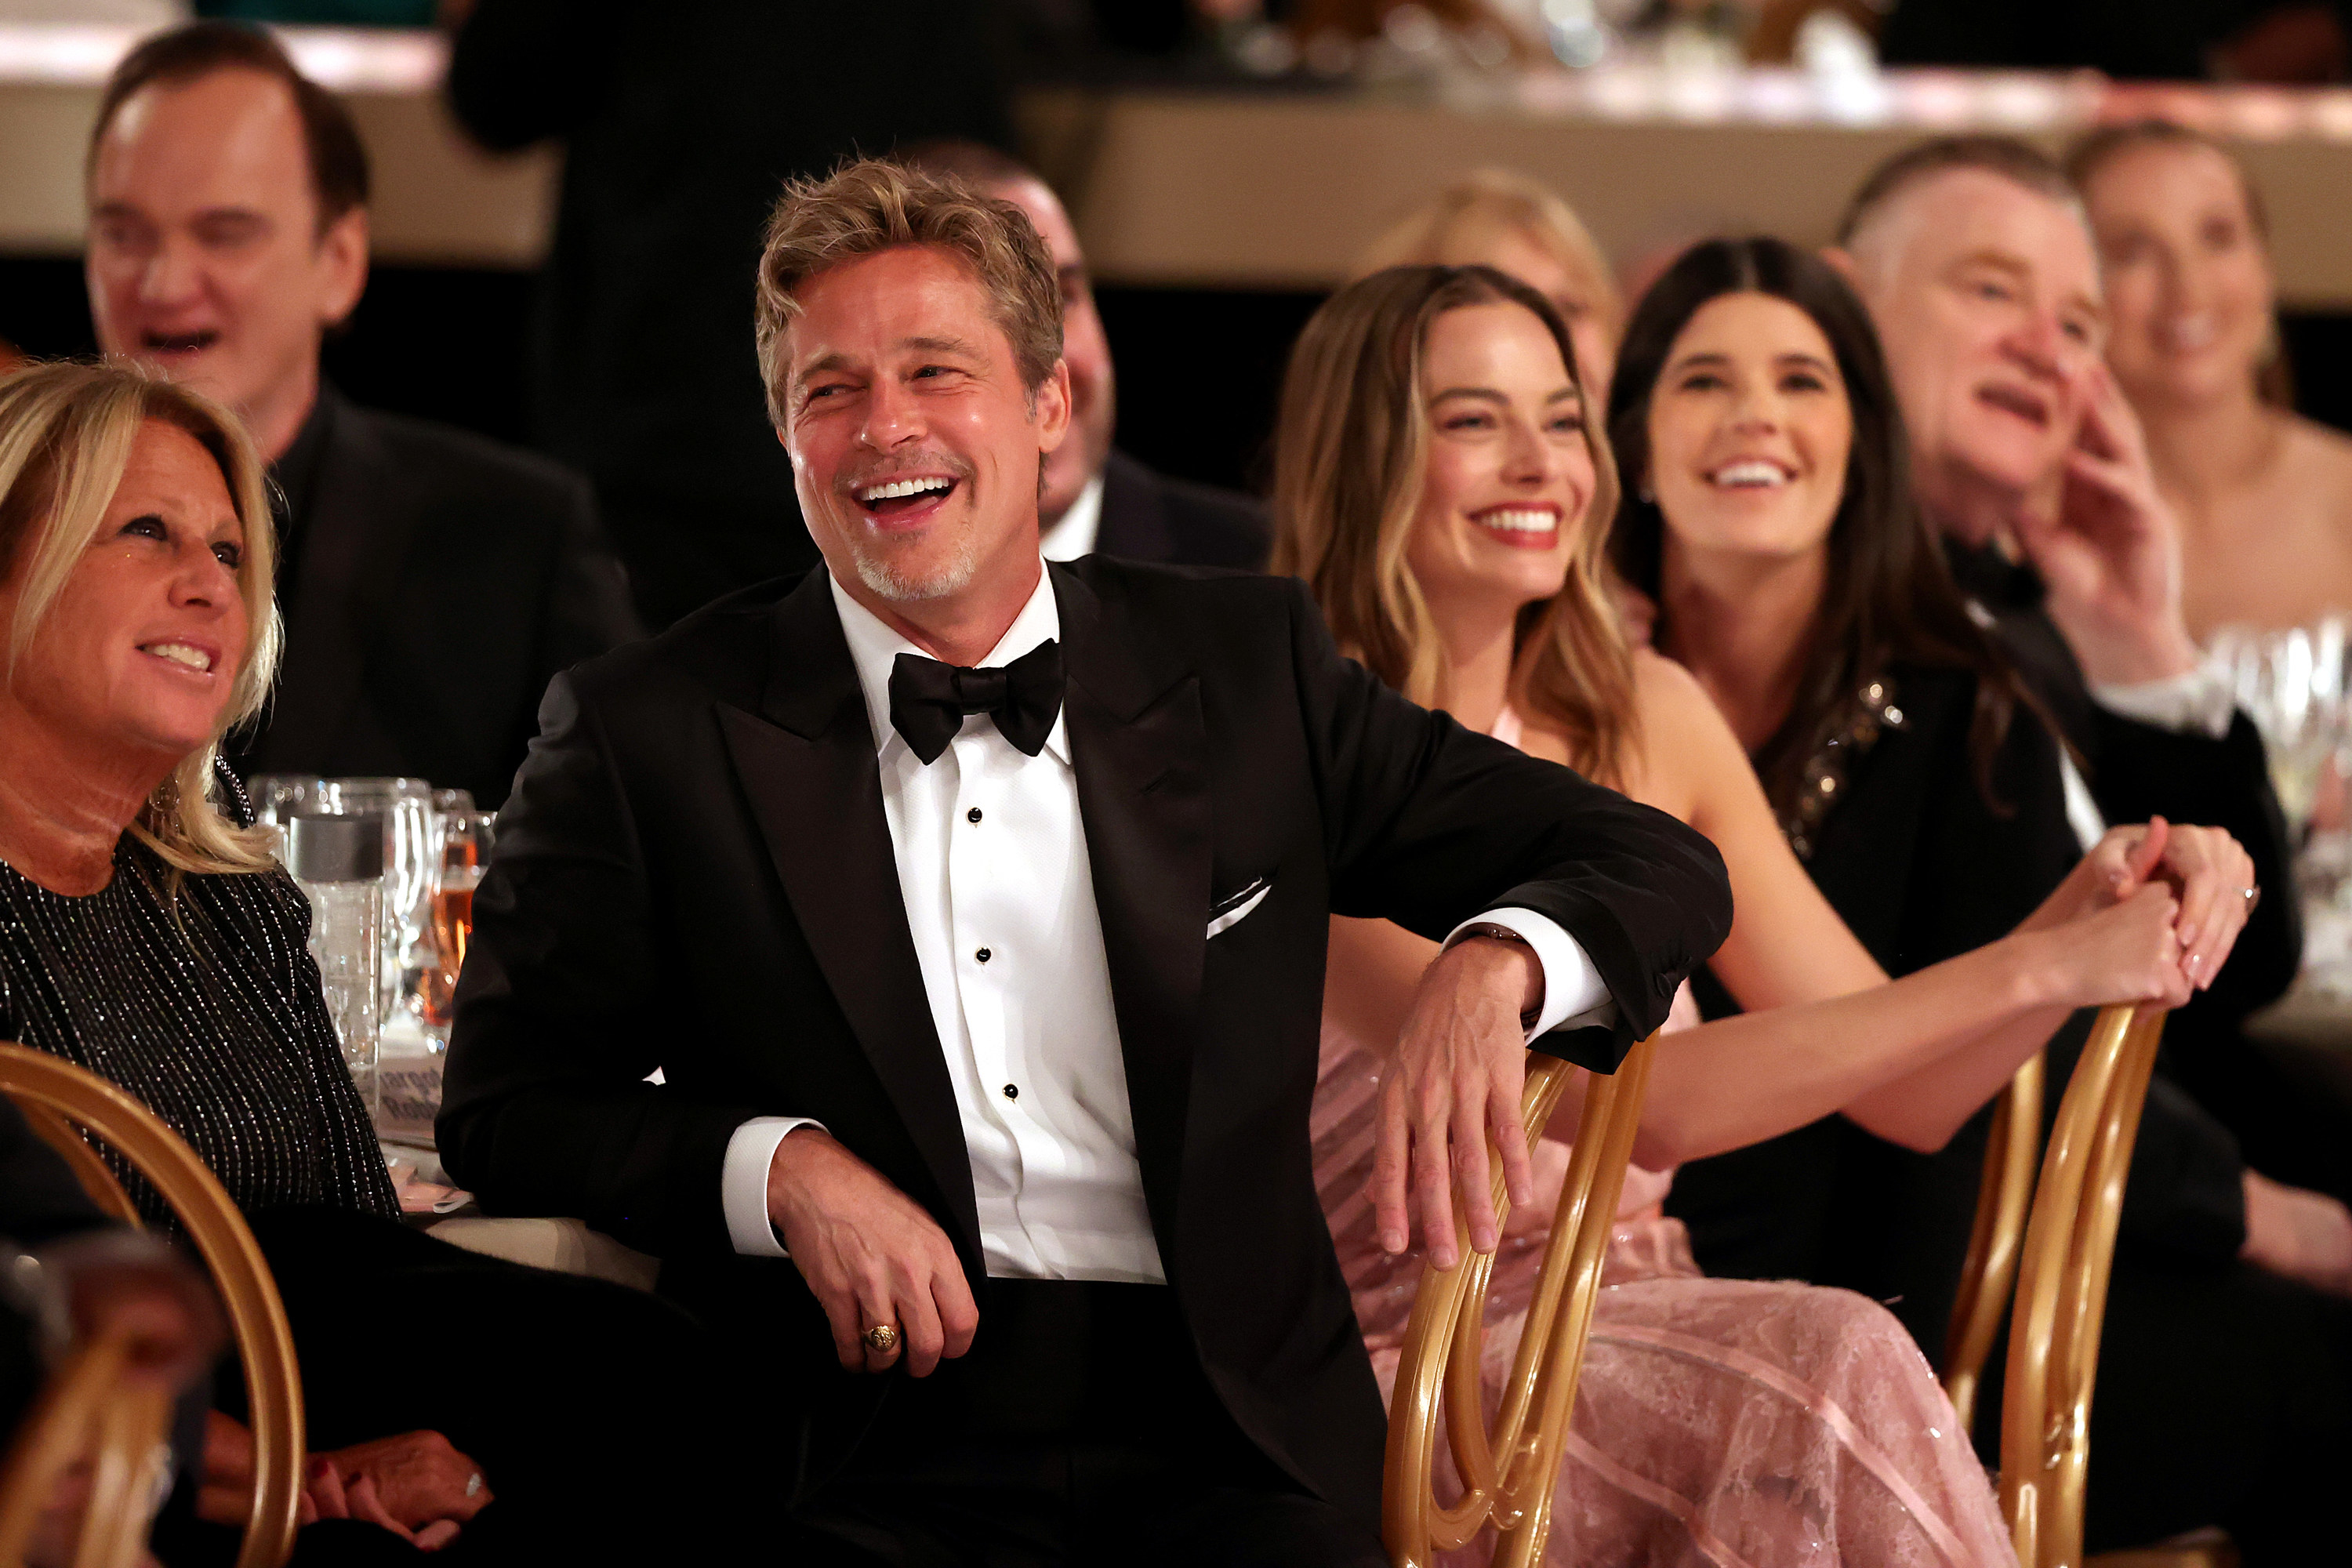 Brad wearing a bow tie in the awards show audience laughing